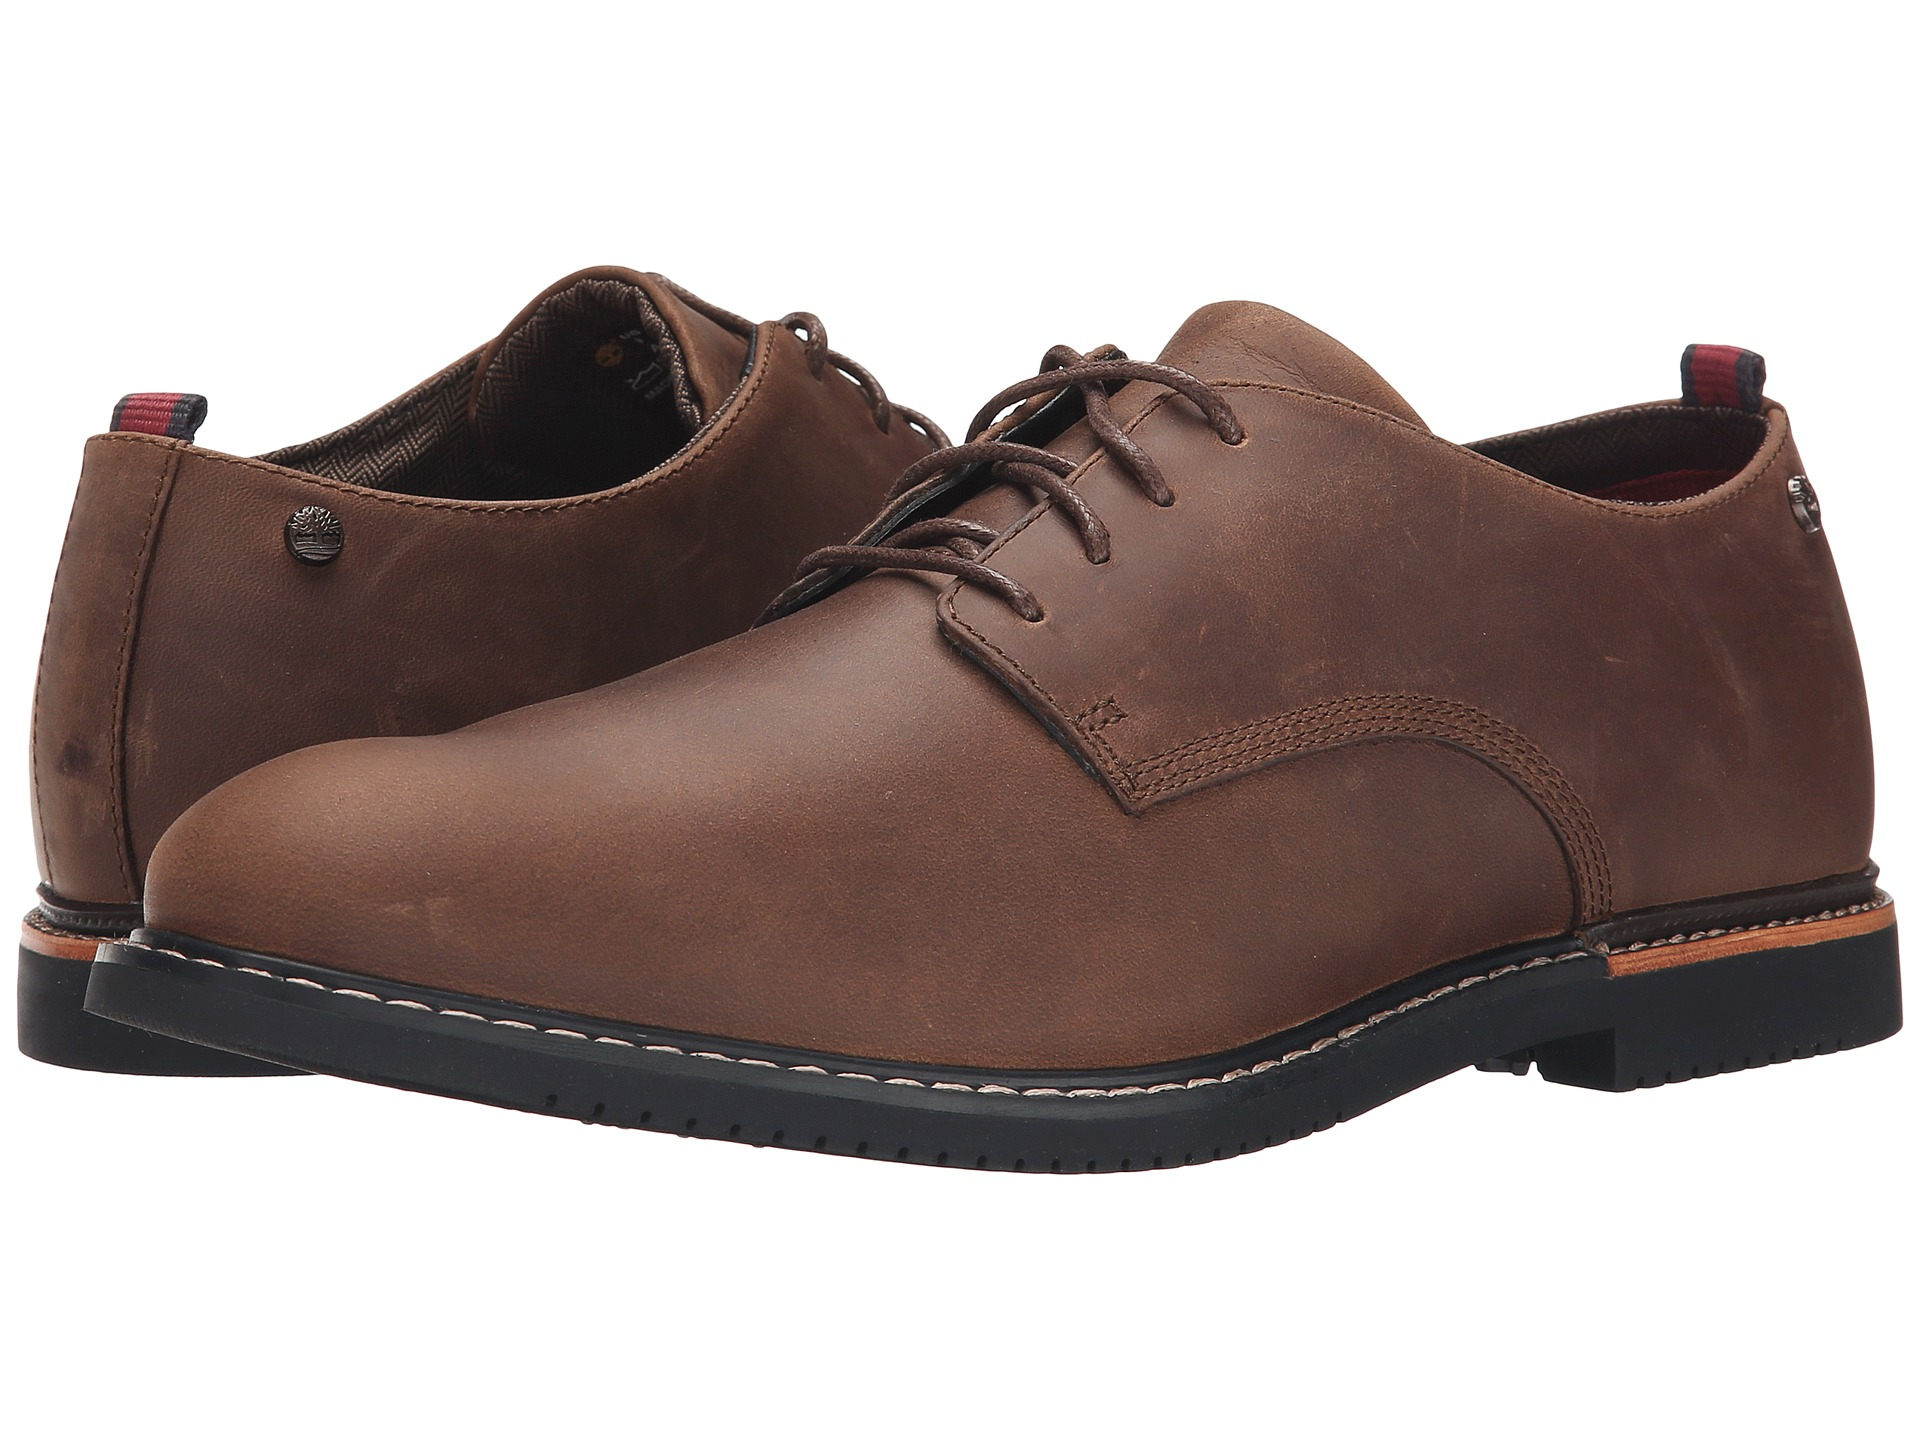 Timberland Brook Park Oxford in Brown for Men - Lyst